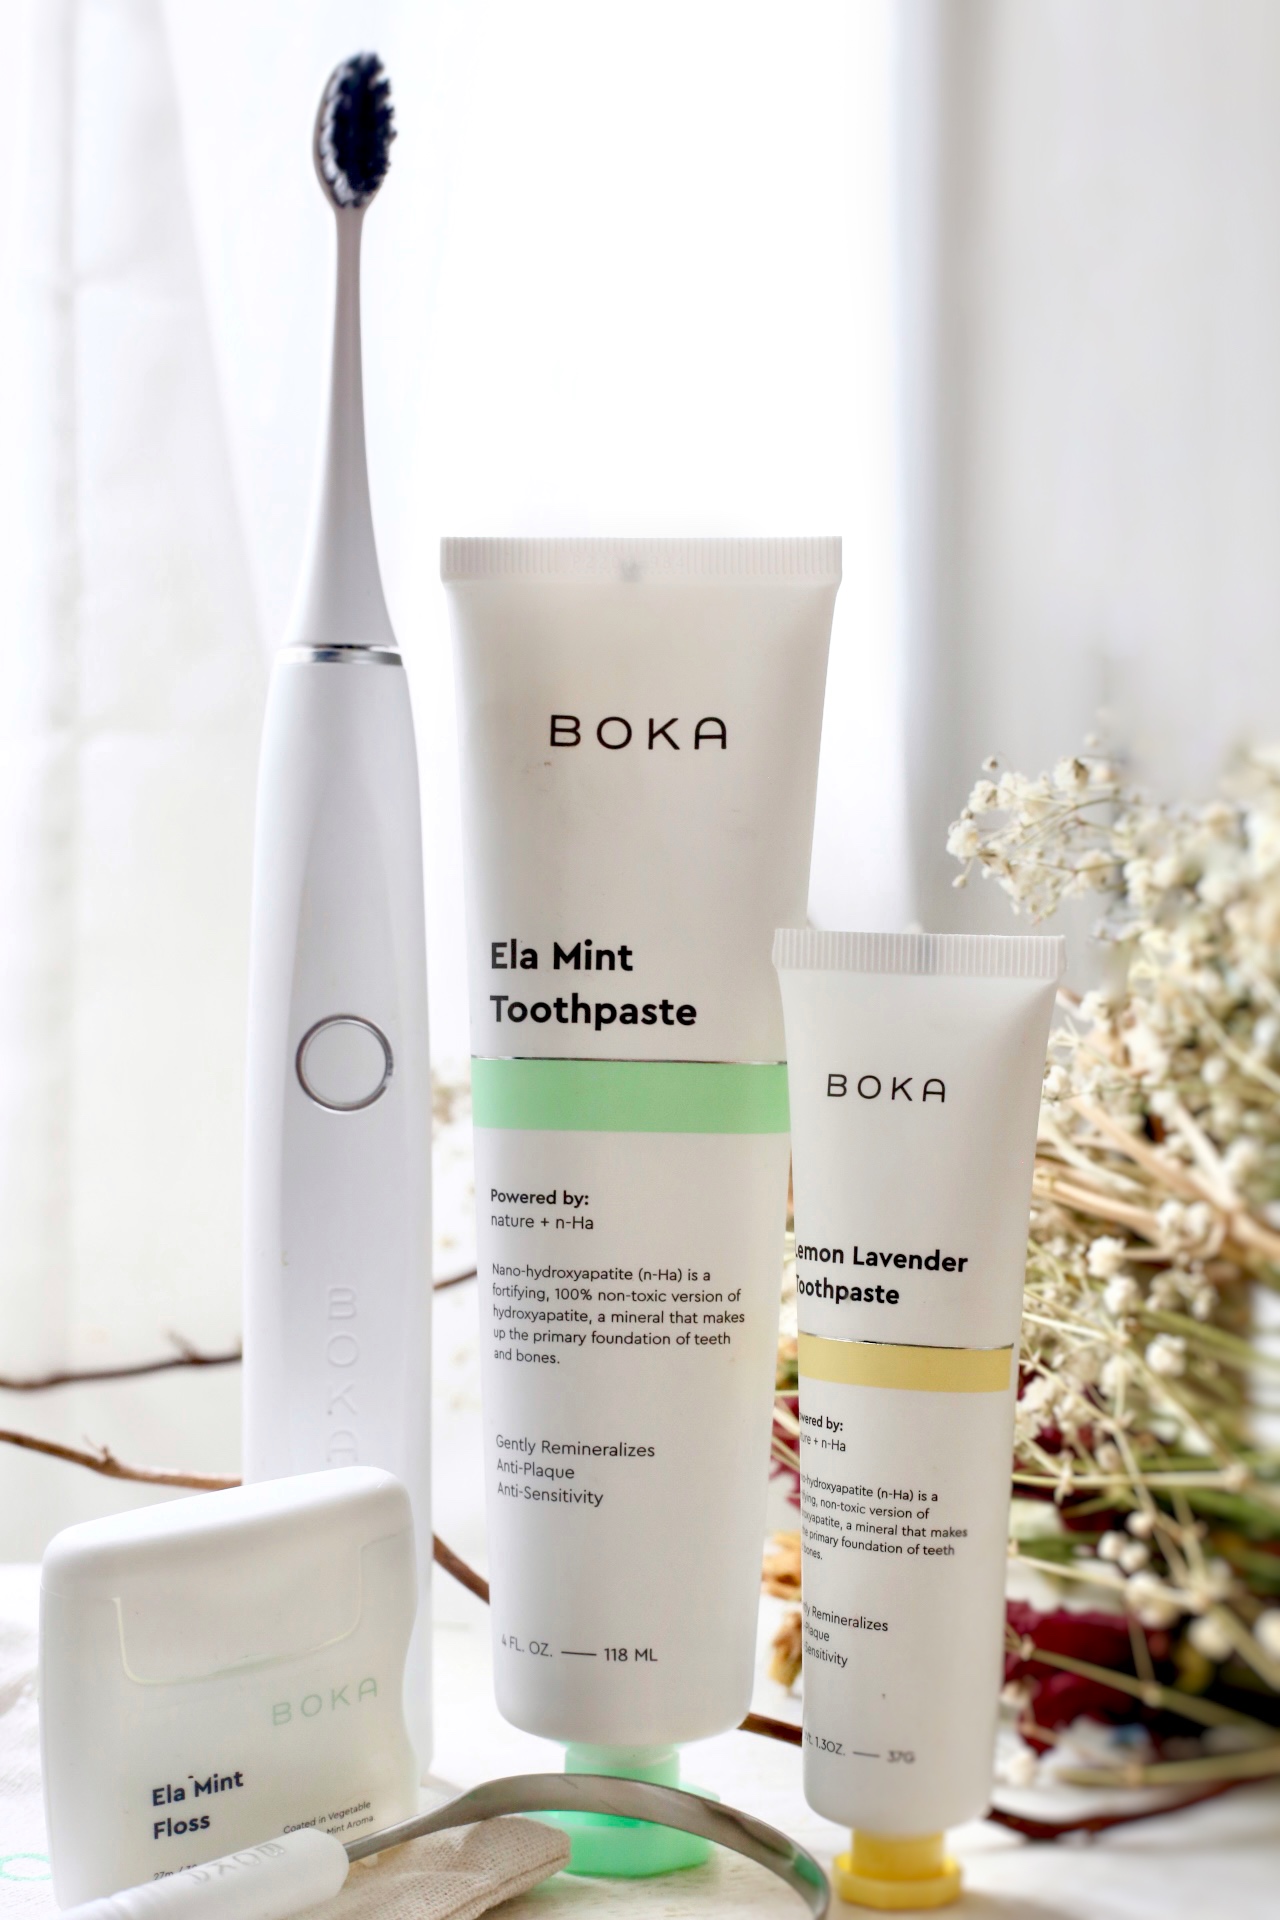 Boka Toothpaste Review + Discount Code